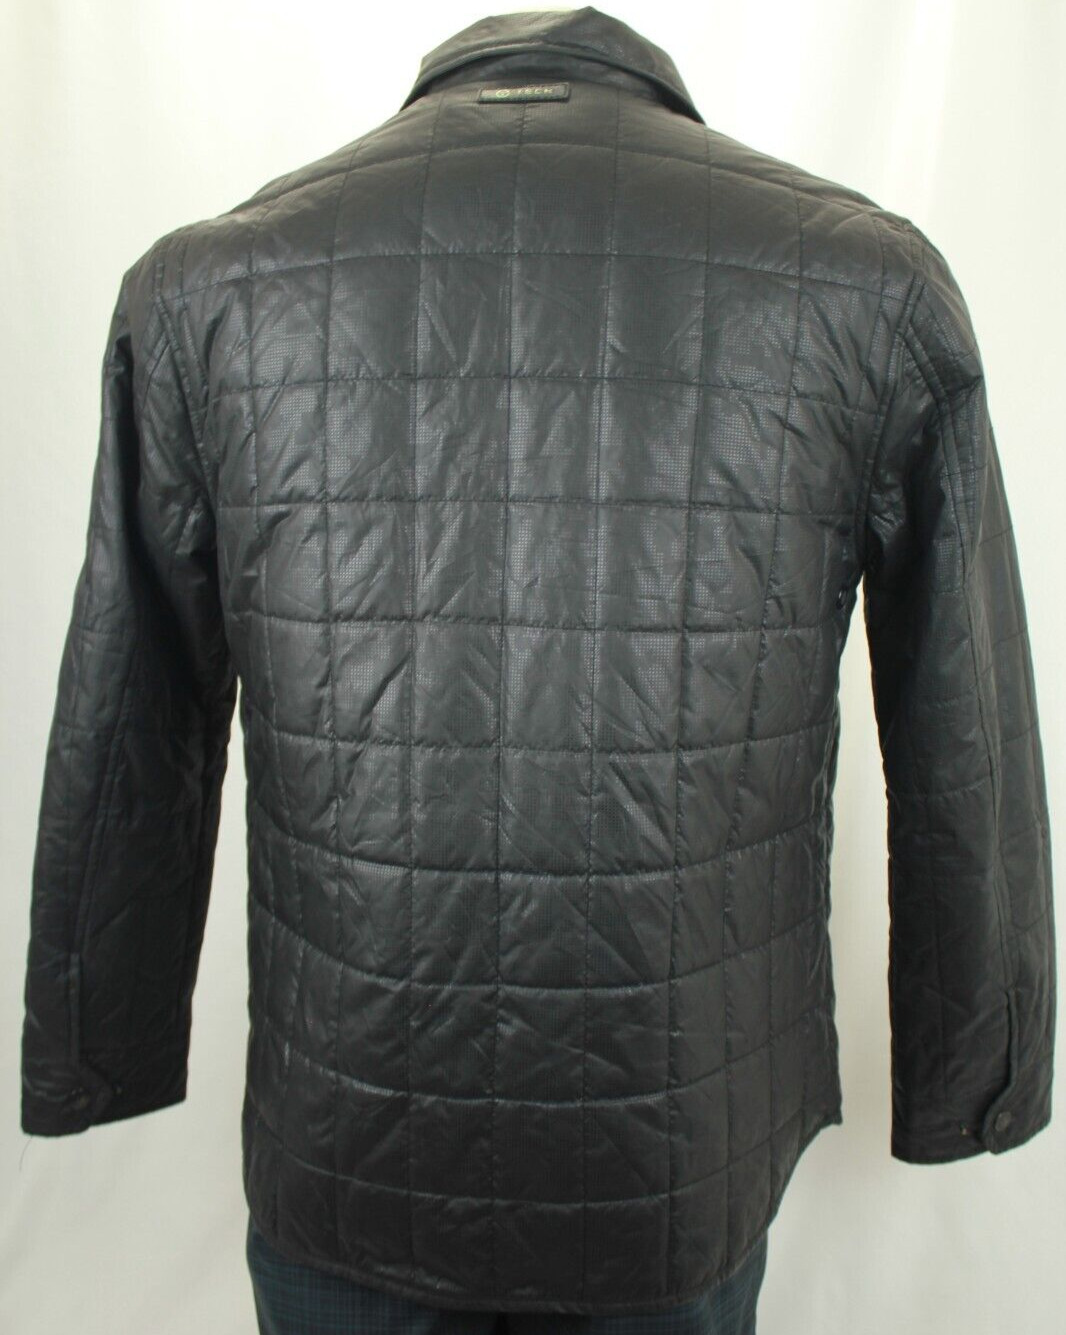 T-TECH BY TUMI MEN'S BLACK POLYFIL QUILTED JACKET SIZE M VGC!